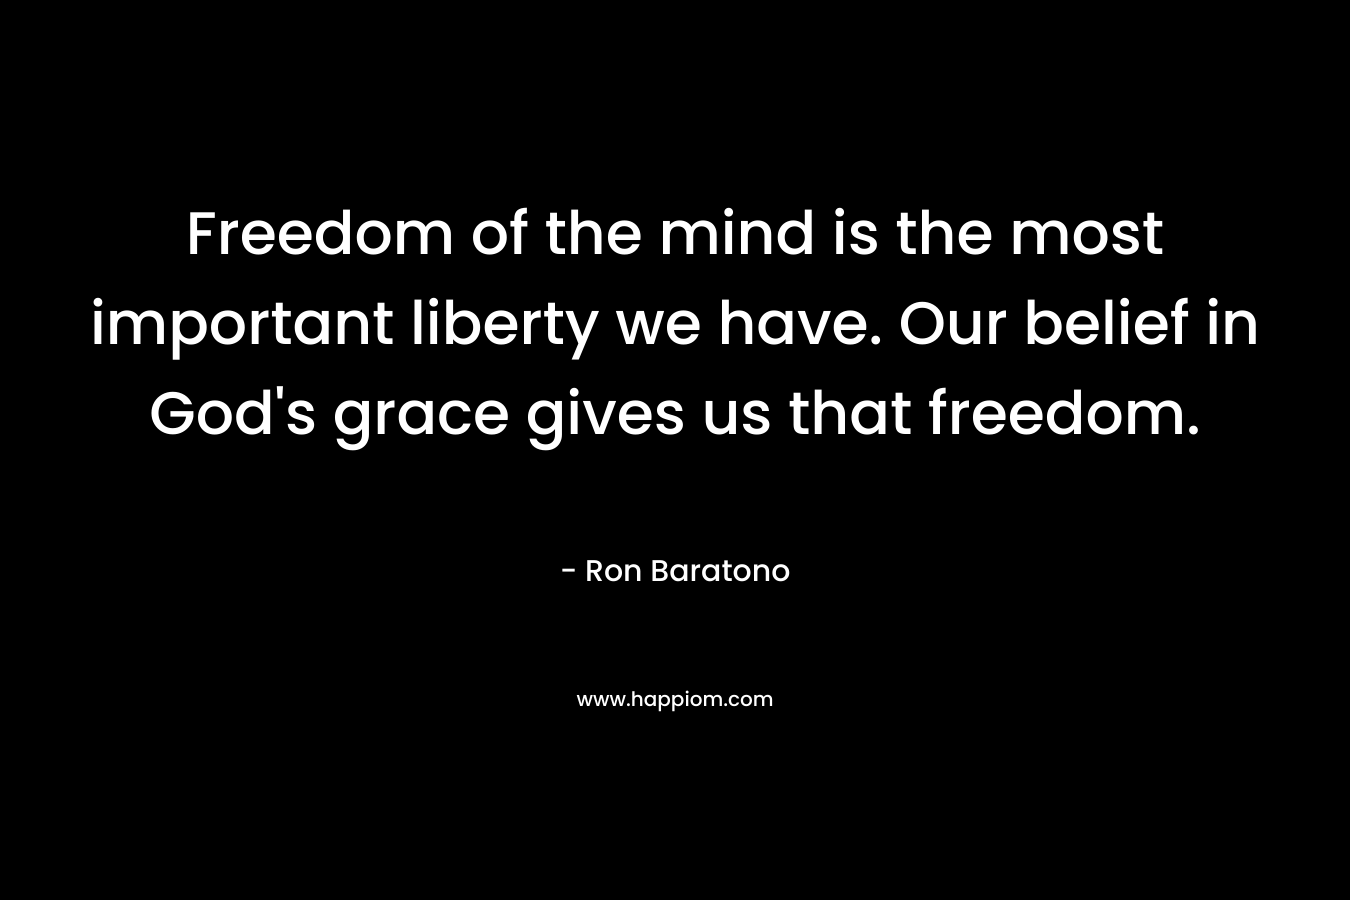 Freedom of the mind is the most important liberty we have. Our belief in God’s grace gives us that freedom. – Ron Baratono